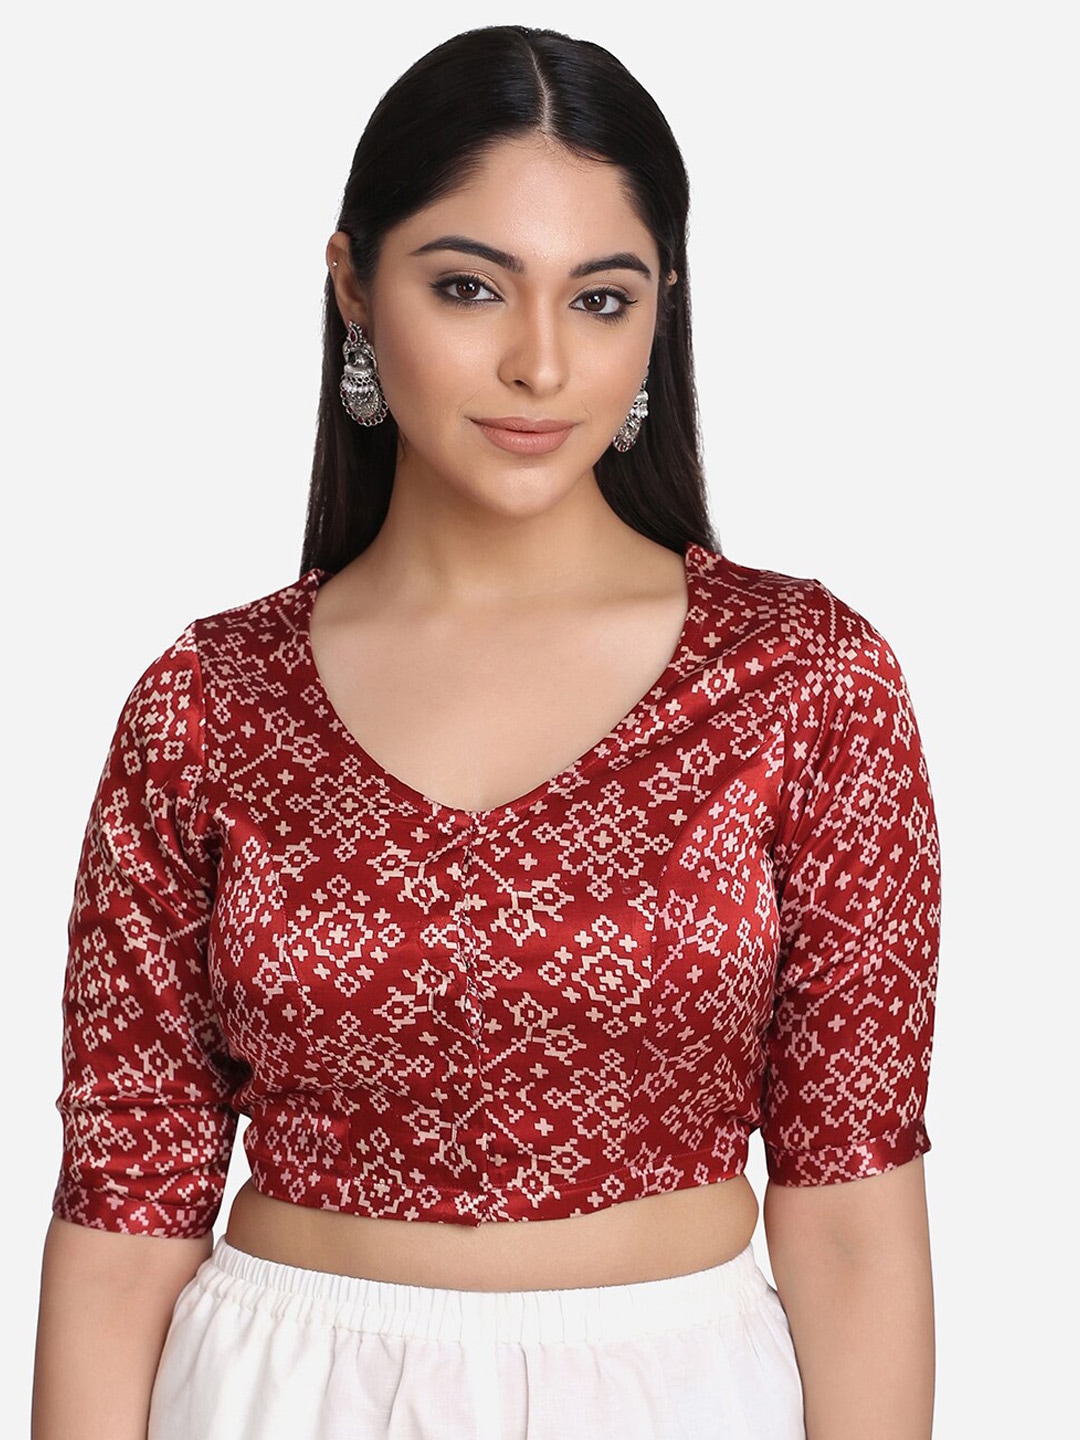 THE WEAVE TRAVELLER Maroon Printed Ready-Made Non Paded Saree Blouse Price in India